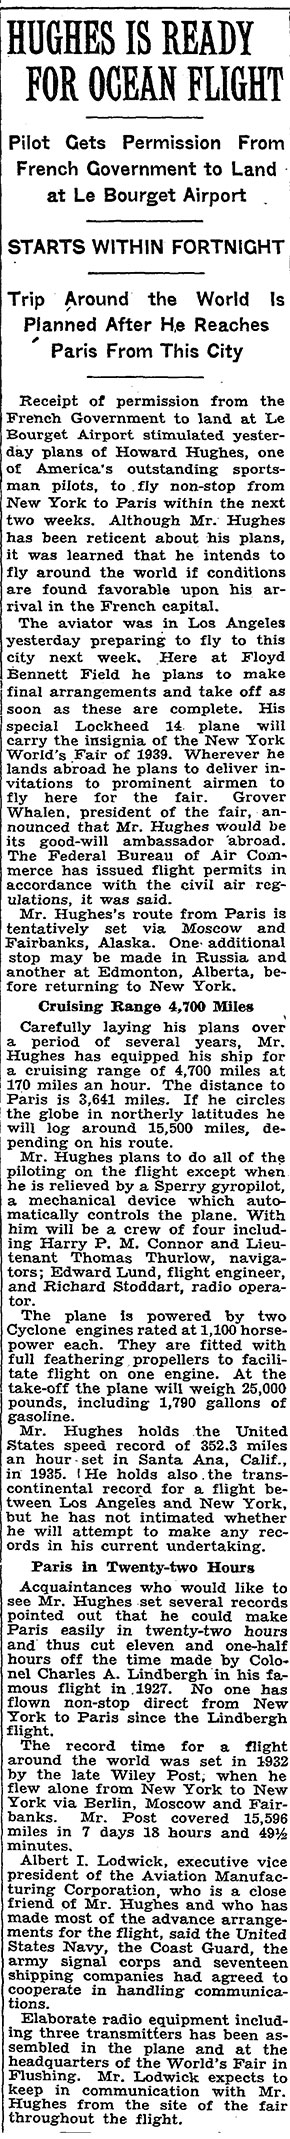 Hughes Global Flight, The New York Times, June 25, 1938 (Source: NYT)